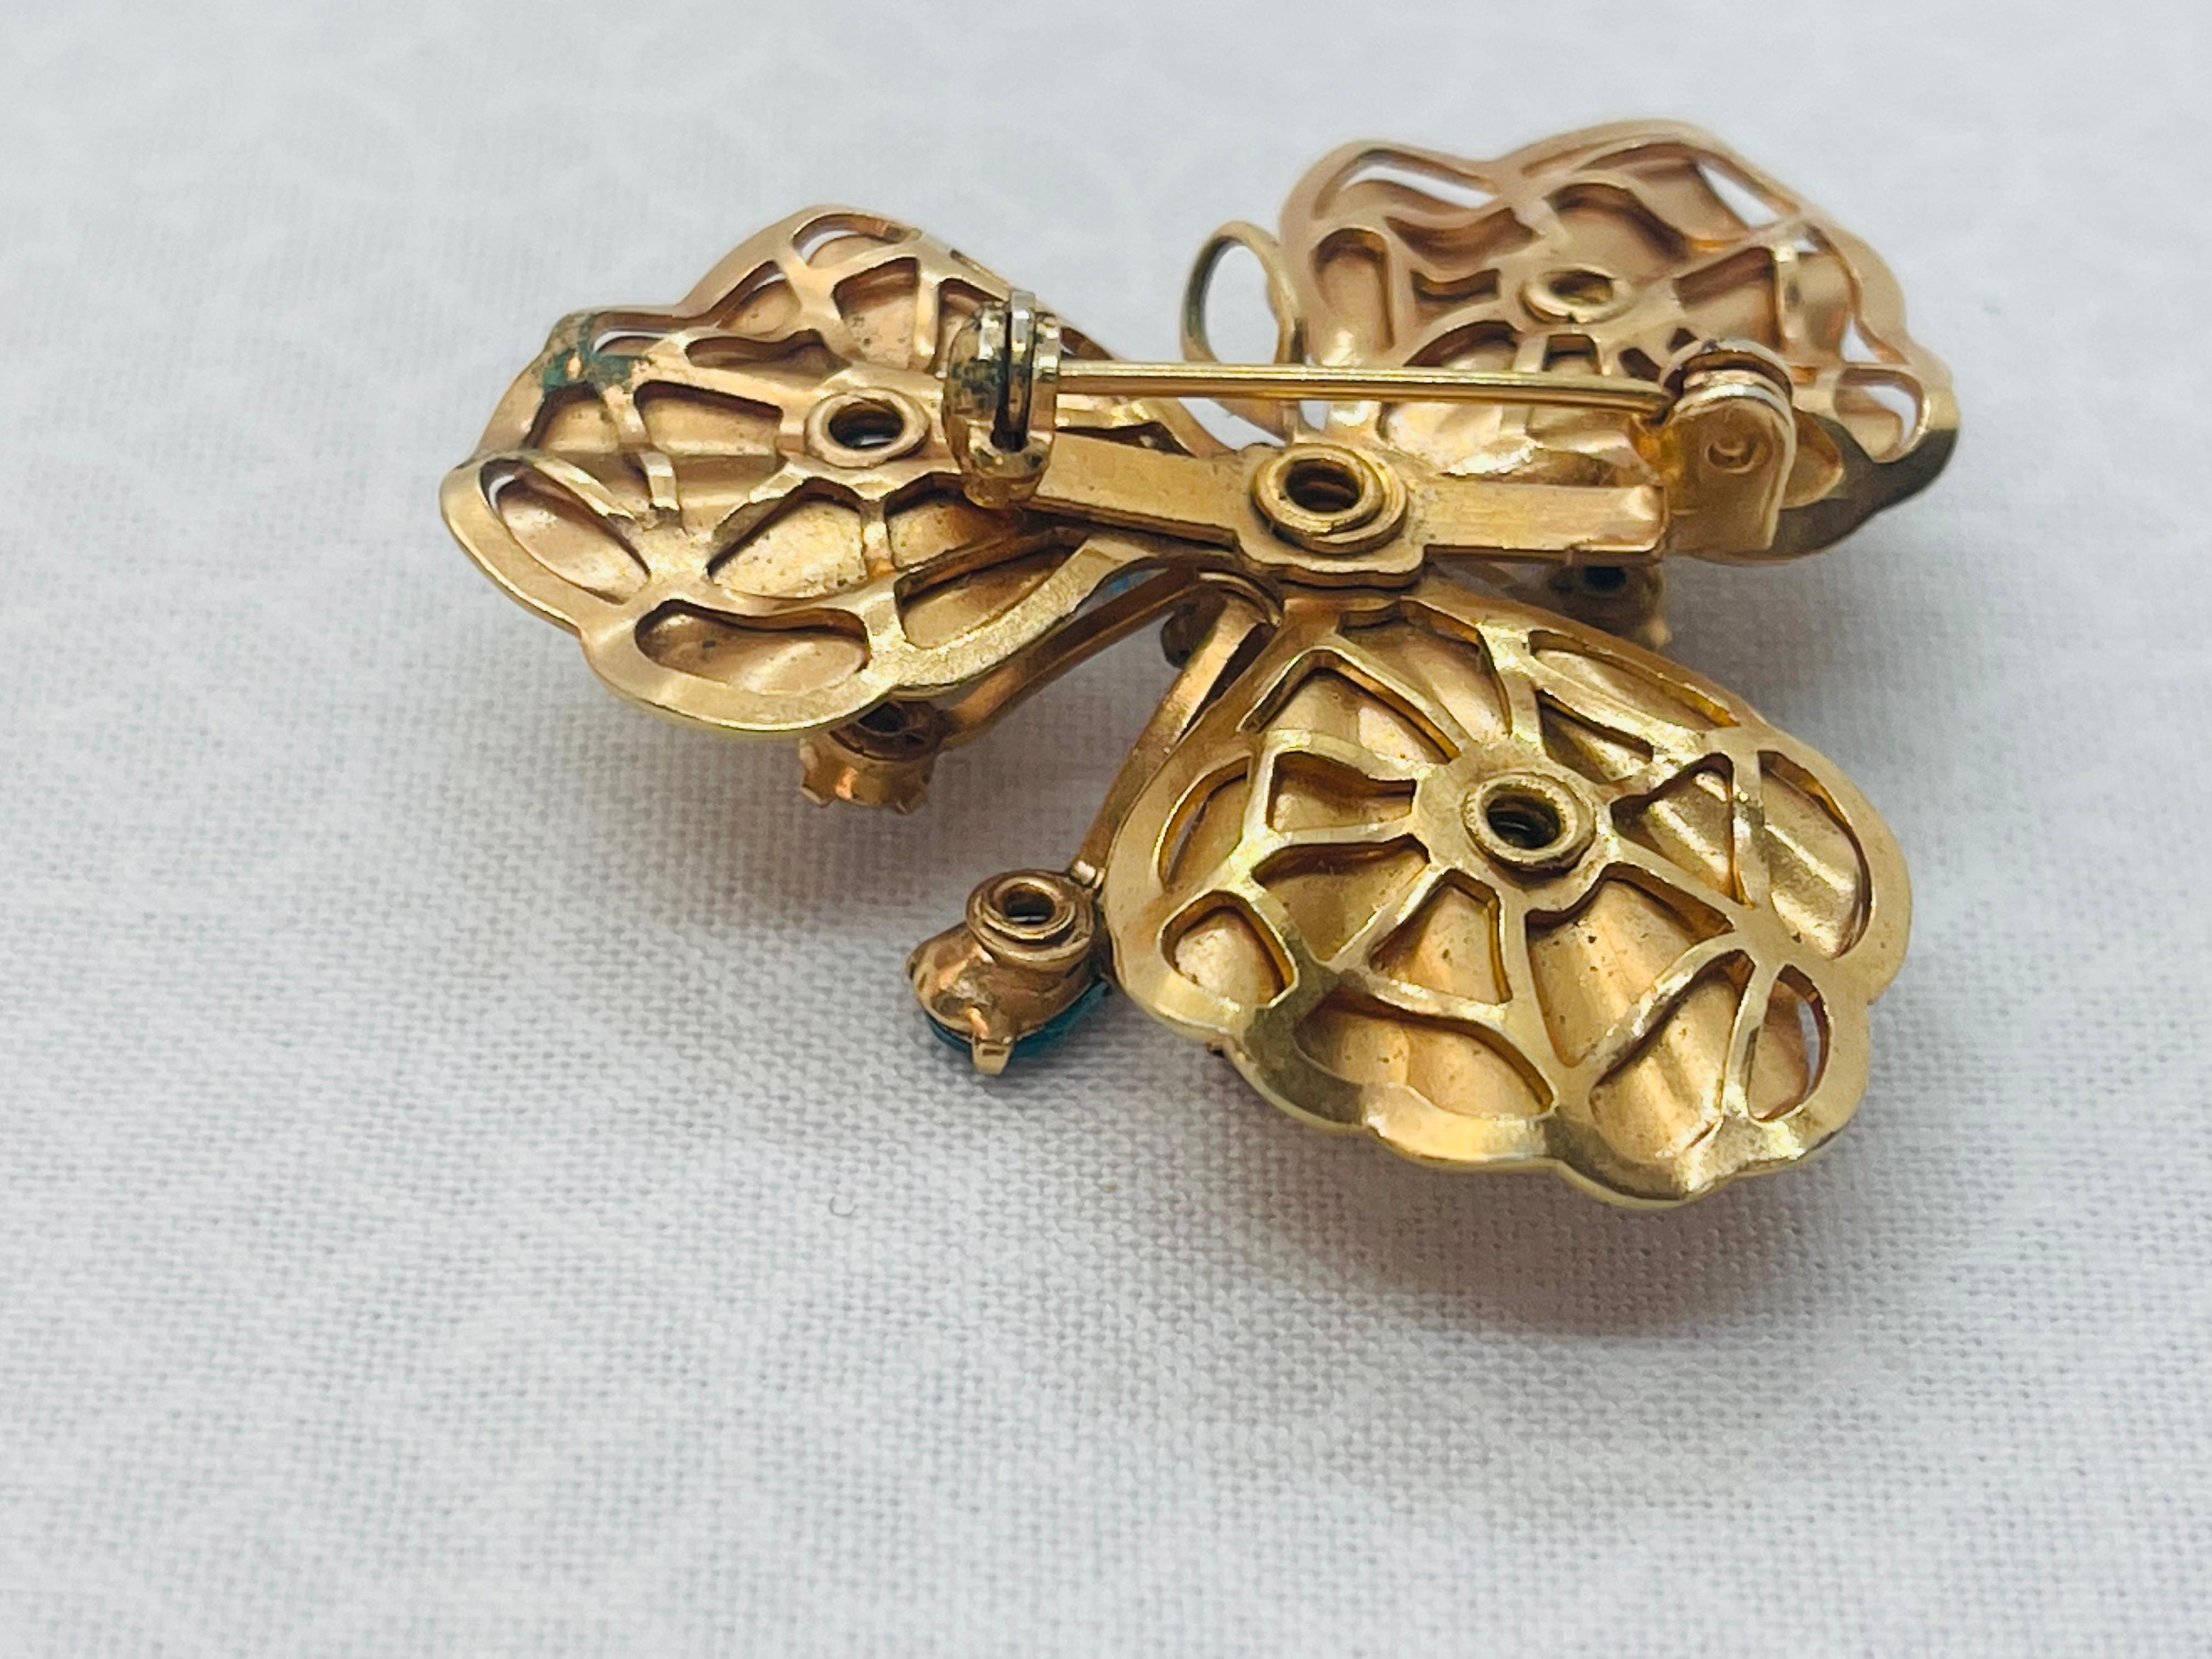 Bugbee & Niles Matching Earrings and Brooch Set Circa. 1955s - 1959 For Sale 1